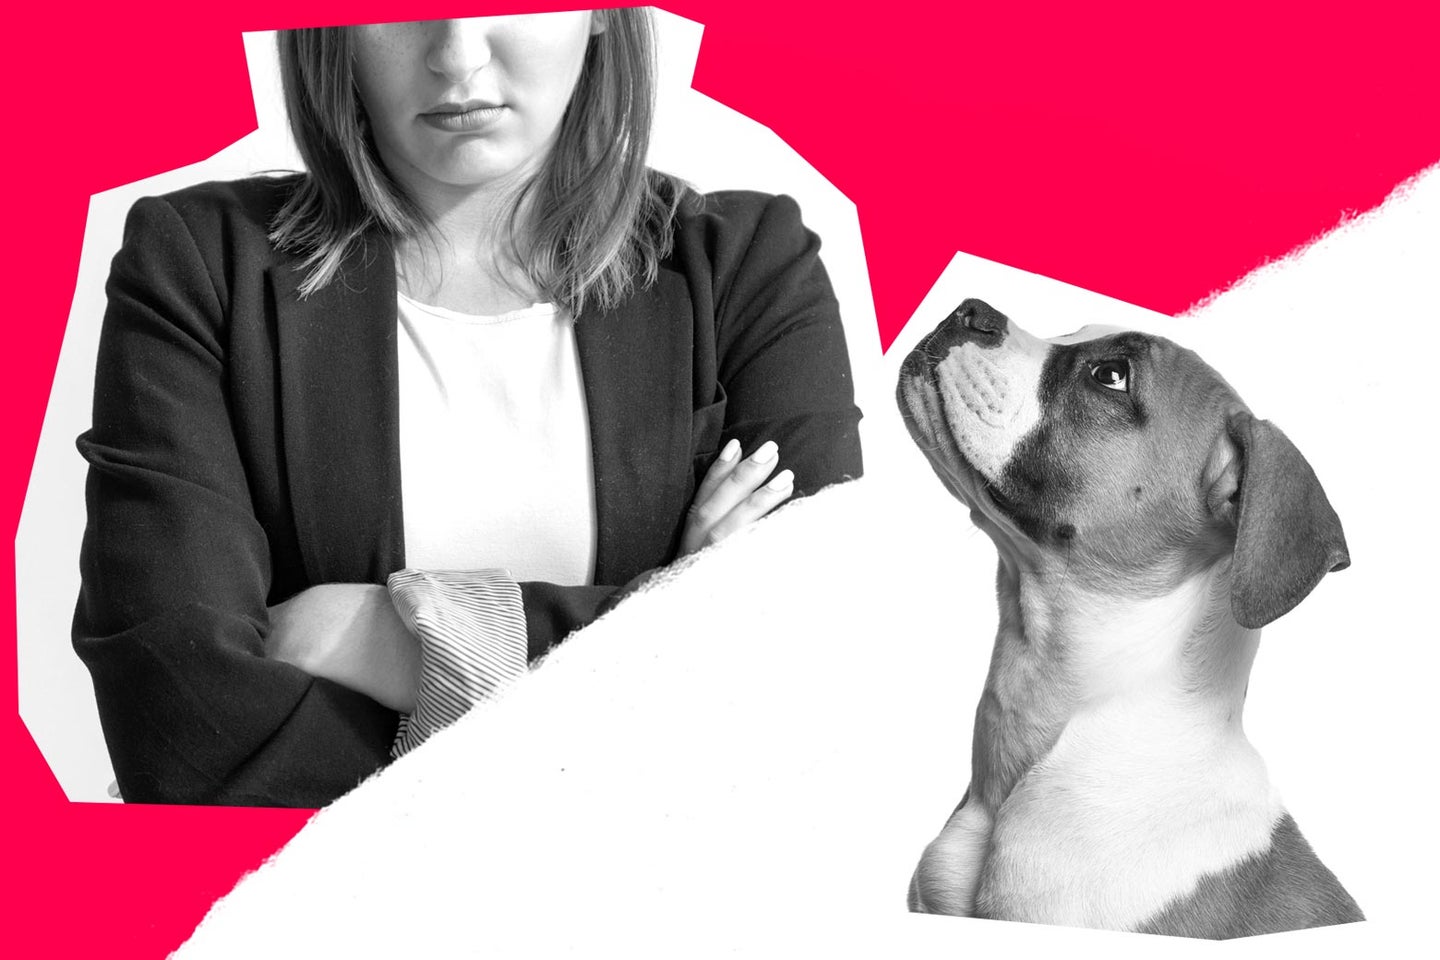 Dear Prudence: My fiancé’s dog is ruining our relationship.